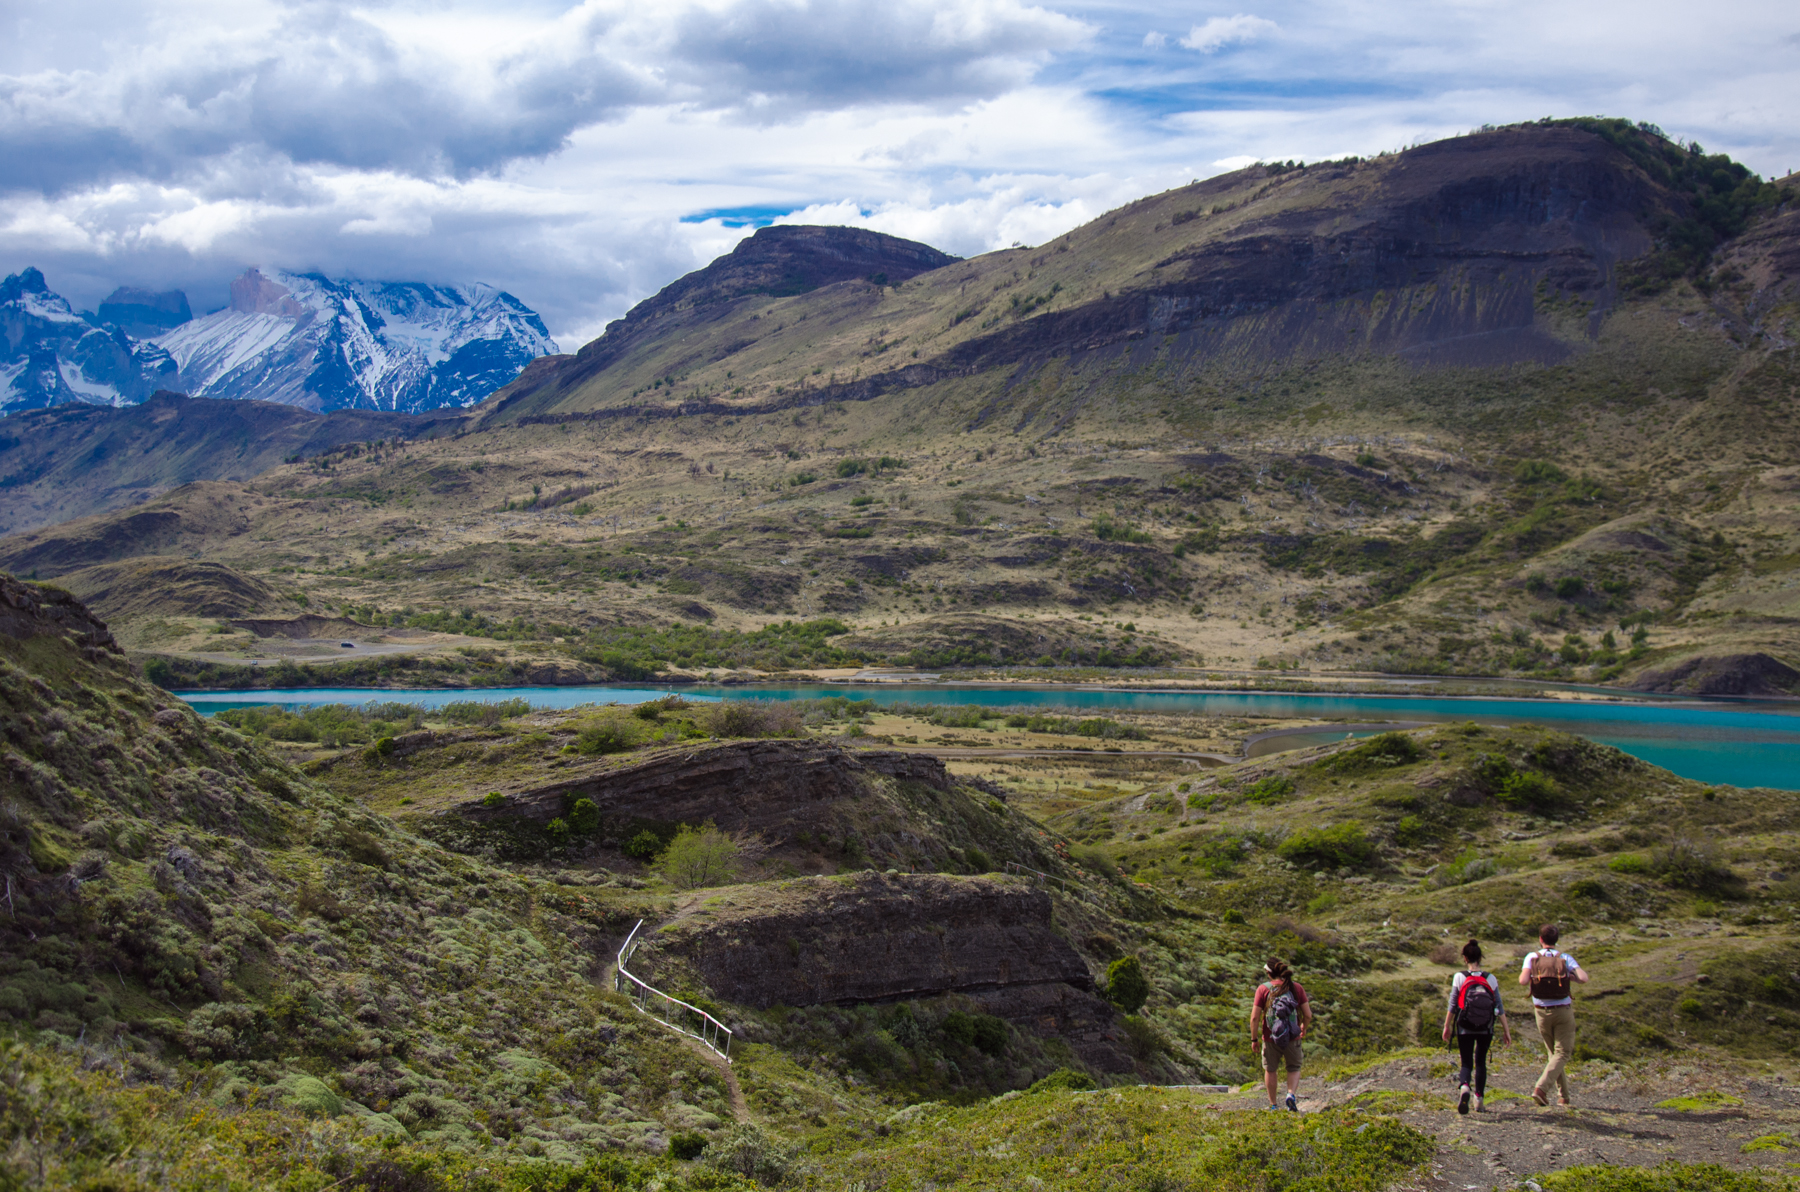 Hiking in Torres del Paine National Park